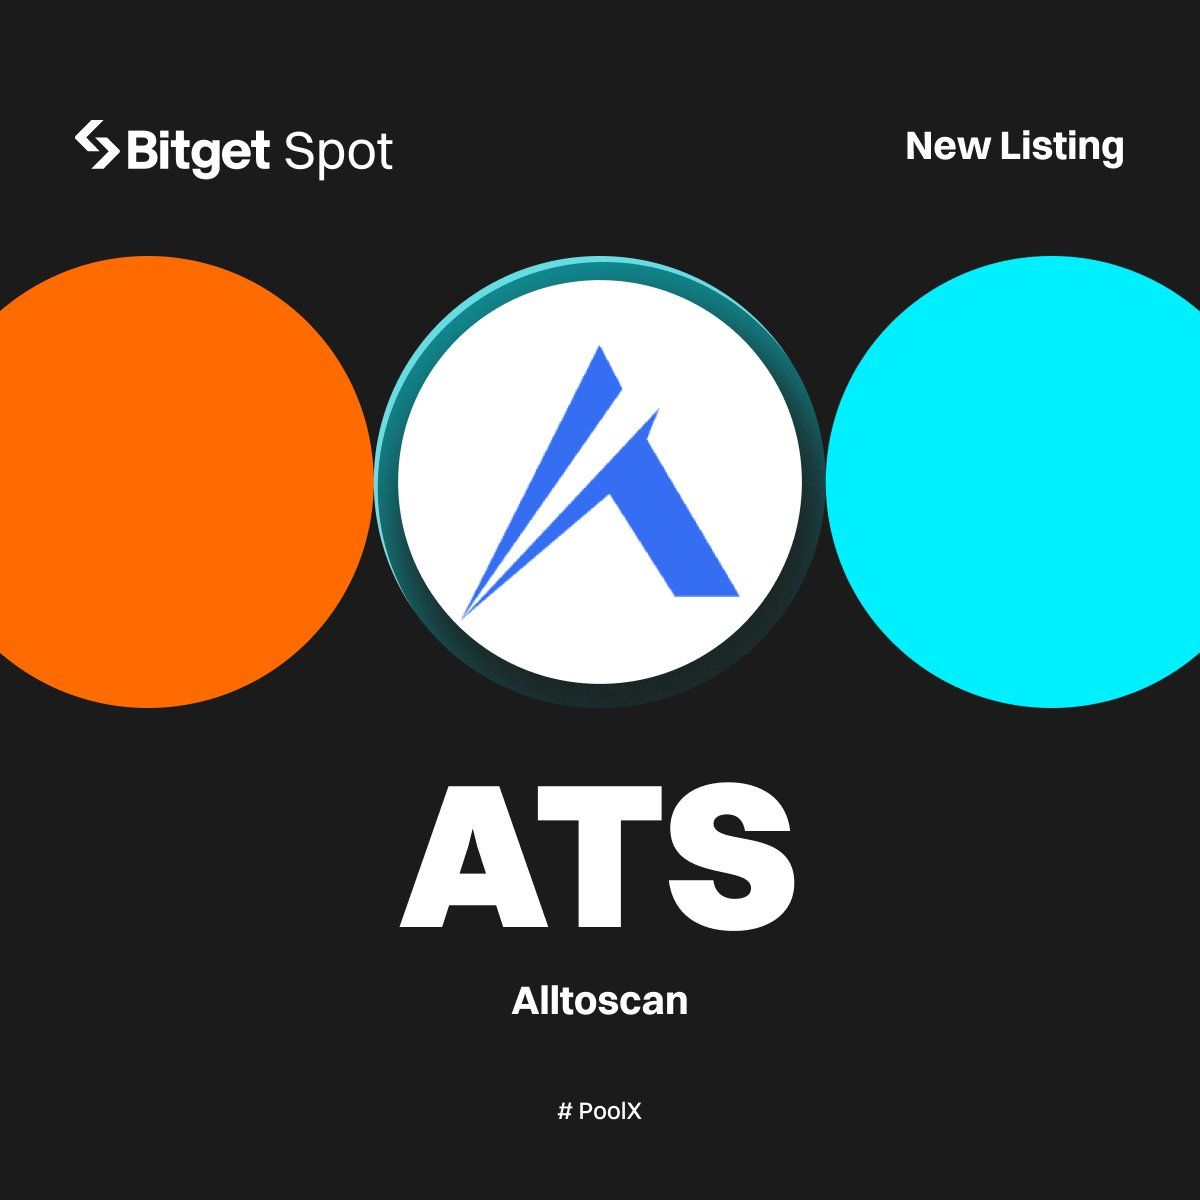 $ATS Token announced to be traded on Bitget on May 13th! The project is currently listed on mexc.com and gate.io, showing a significant performance since its inception. I expect a huge upside with the listing on Bitget. You can get your 💰 $ATS